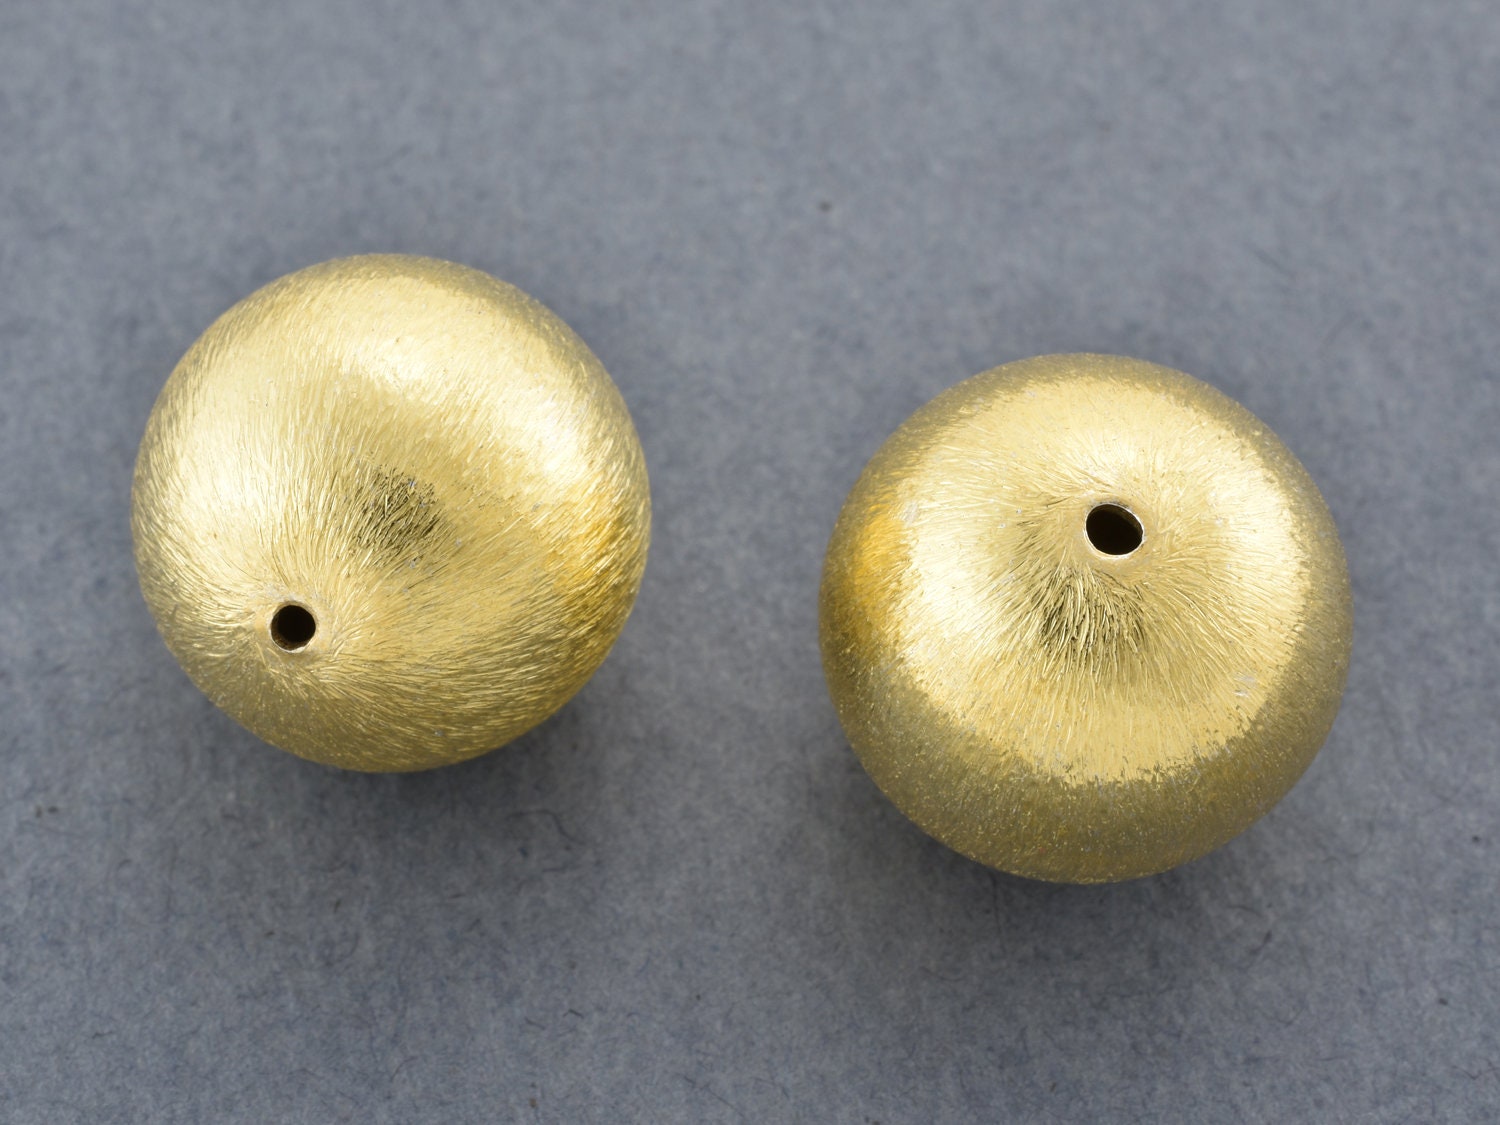 18mm 2pc Brushed Gold Beads for Jewelry Making, Gold Plated Round Brushed  Beads 